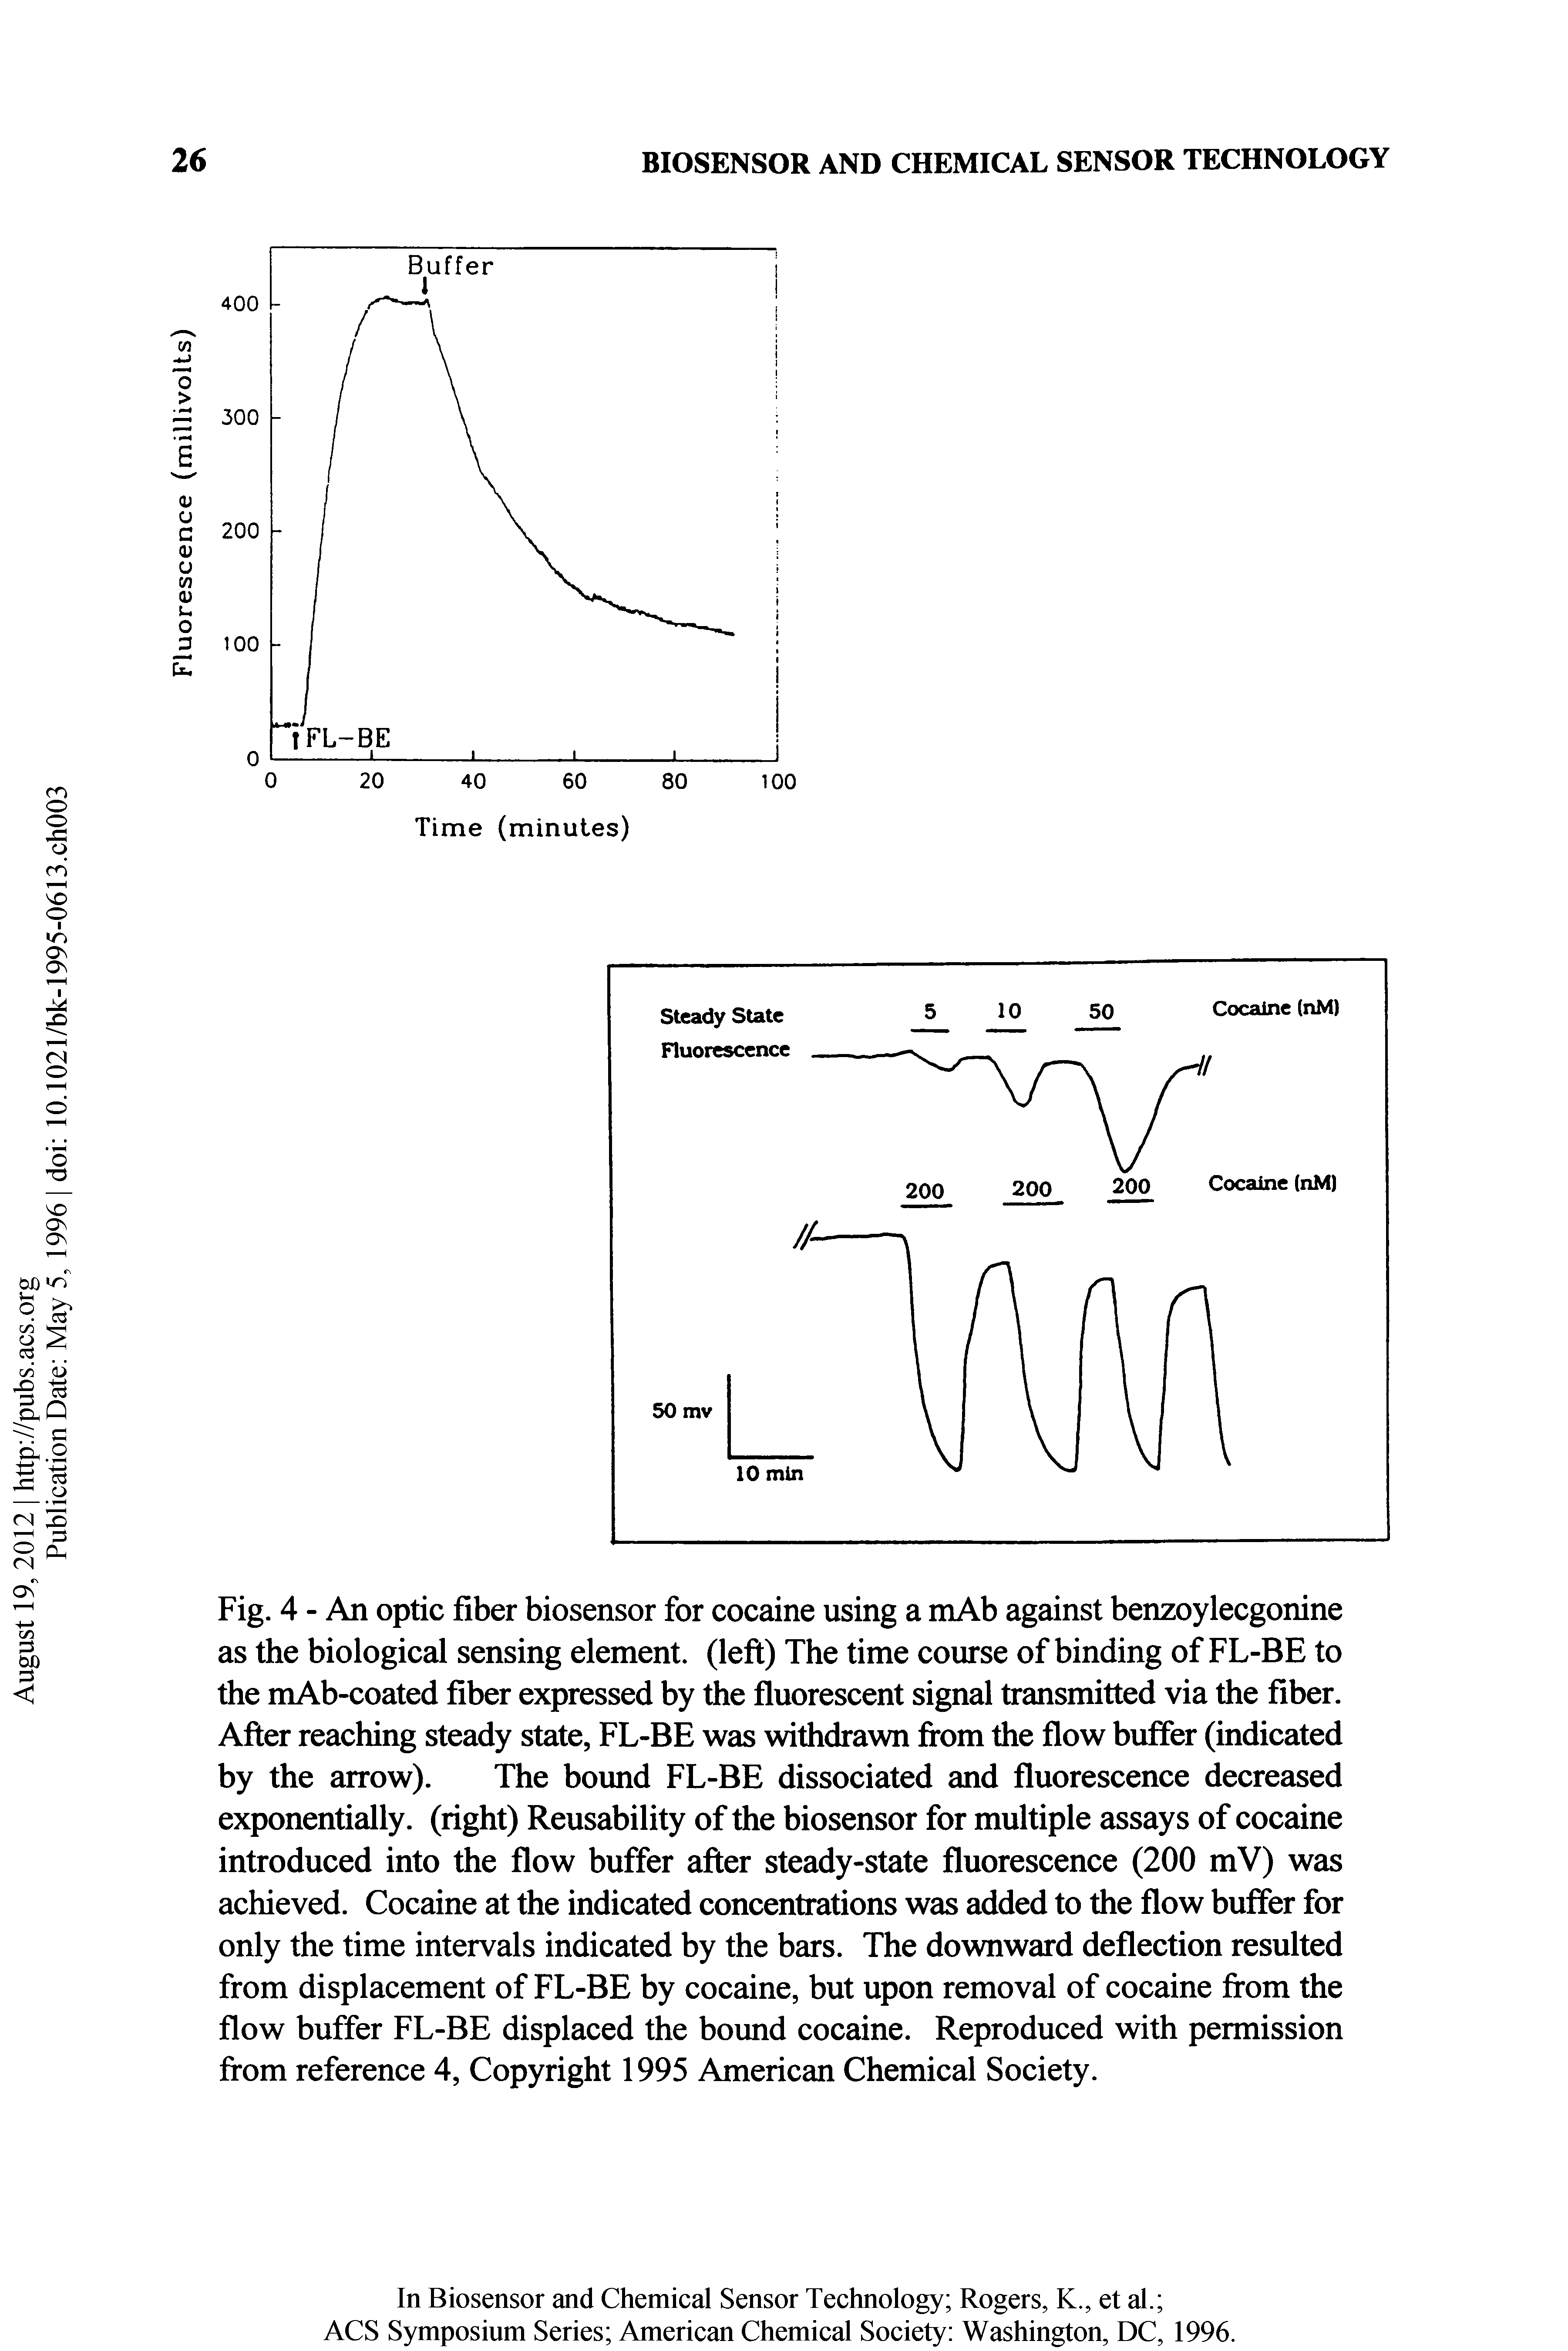 Fig. 4 - An optic fiber biosensor for cocaine using a mAb against benzoylecgonine as the biological sensing element, (left) The time course of binding of FL-BE to the mAb-coated fiber expressed by the fluorescent signal transmitted via the fiber. After reaching steady state, FL-BE was withdrawn from the flow buffer (indicated by the arrow). The bound FL-BE dissociated and fluorescence decreased exponentially, (right) Reusability of the biosensor for multiple assays of cocaine introduced into the flow buffer after steady-state fluorescence (200 mV) was achieved. Cocaine at the indicated concentrations was added to the flow buffer for only the time intervals indicated by the bars. The downward deflection resulted from displacement of FL-BE by cocaine, but upon removal of cocaine from the flow buffer FL-BE displaced the bound cocaine. Reproduced with permission from reference 4, Copyright 1995 American Chemical Society.